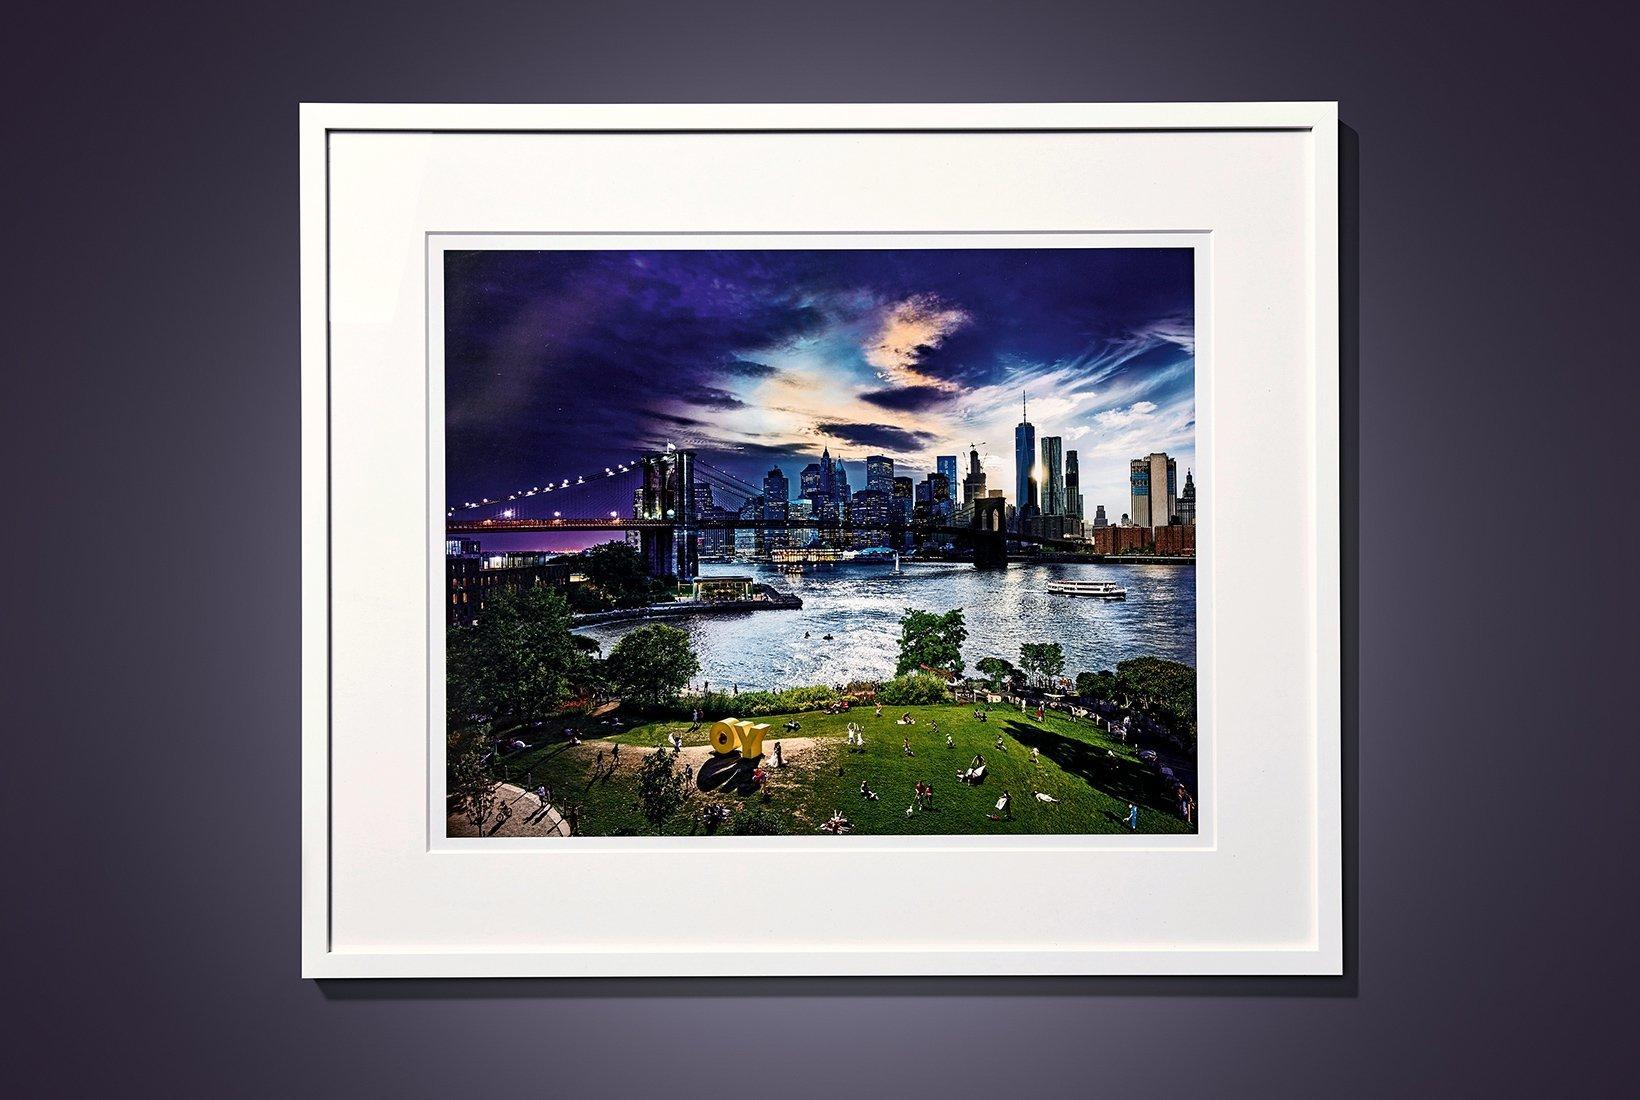 Contemporary Stephen Wilkes, Day to Night, Art Edition No. 1-100 'Brooklyn Bridge, NYC' For Sale